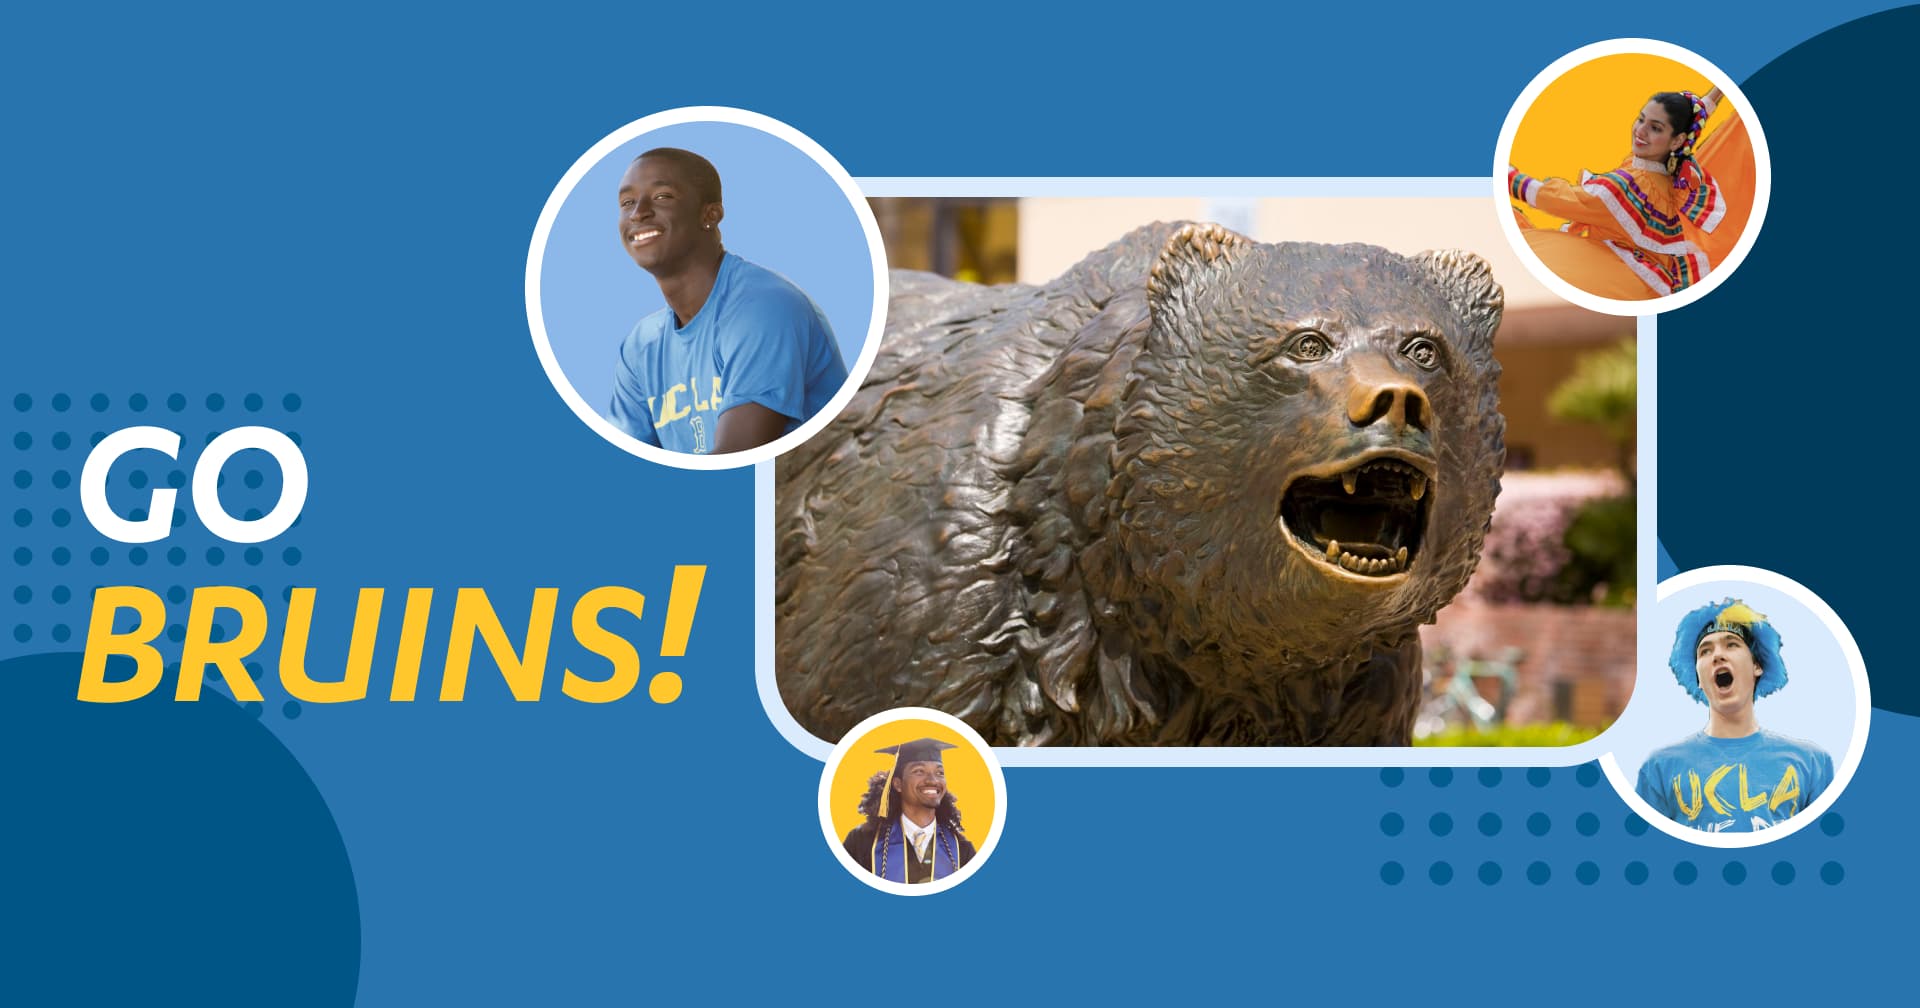 UCLA GO BRUINS! header graphic with a blue background in front of the Bruin Bear